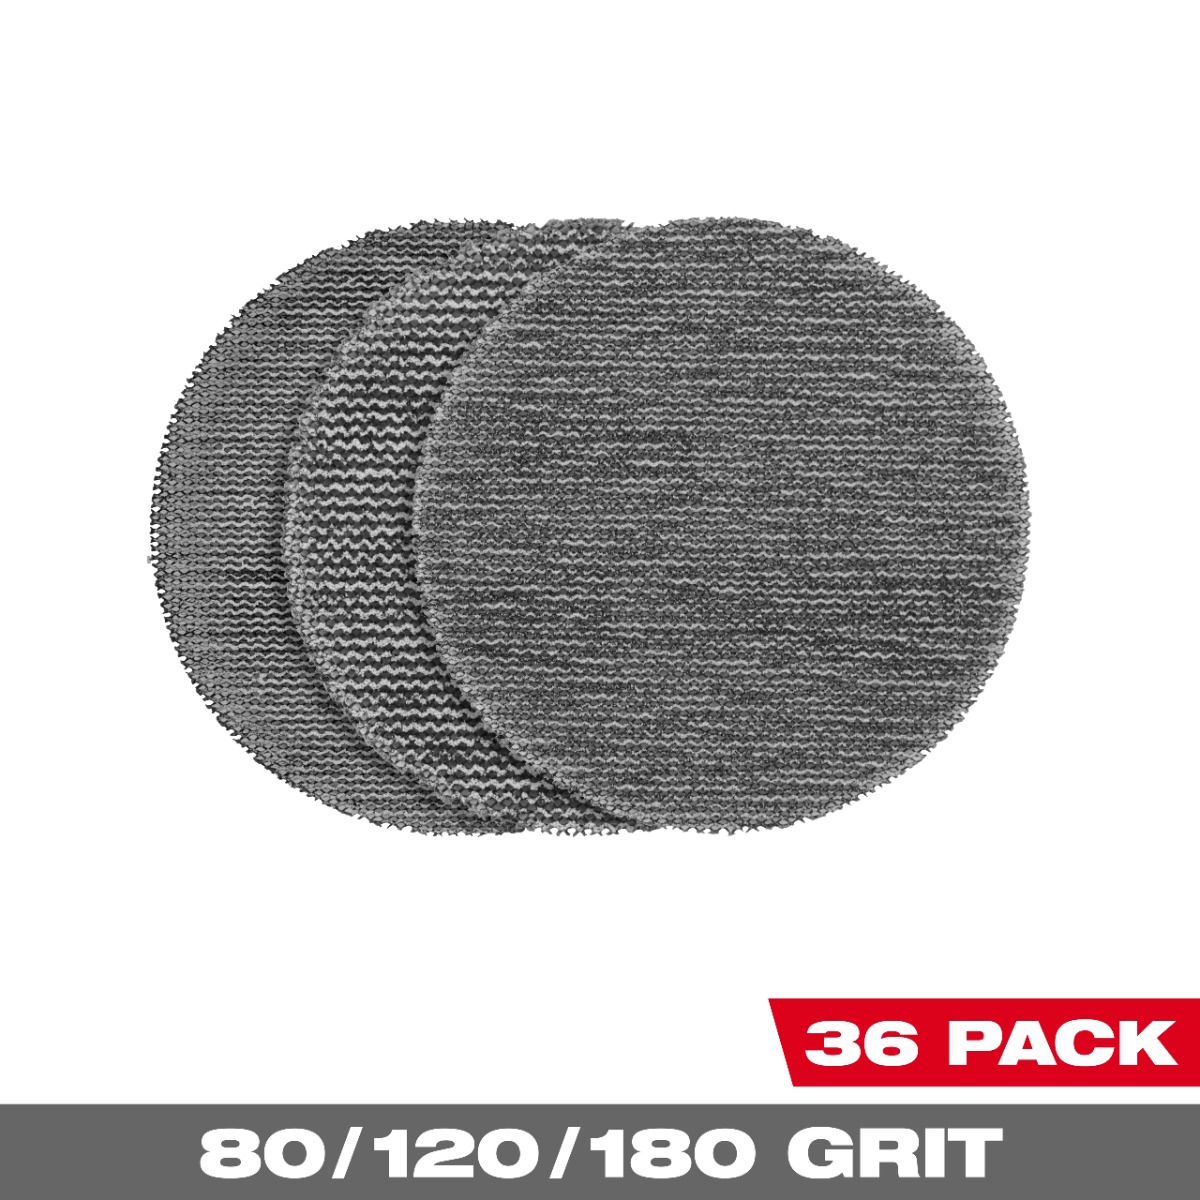 3” Assorted 80, 120, 180 Grit Mesh Sanding Discs with POWERGRID™ Tear Resistant Mesh – 36 pk + 3 Pad Savers